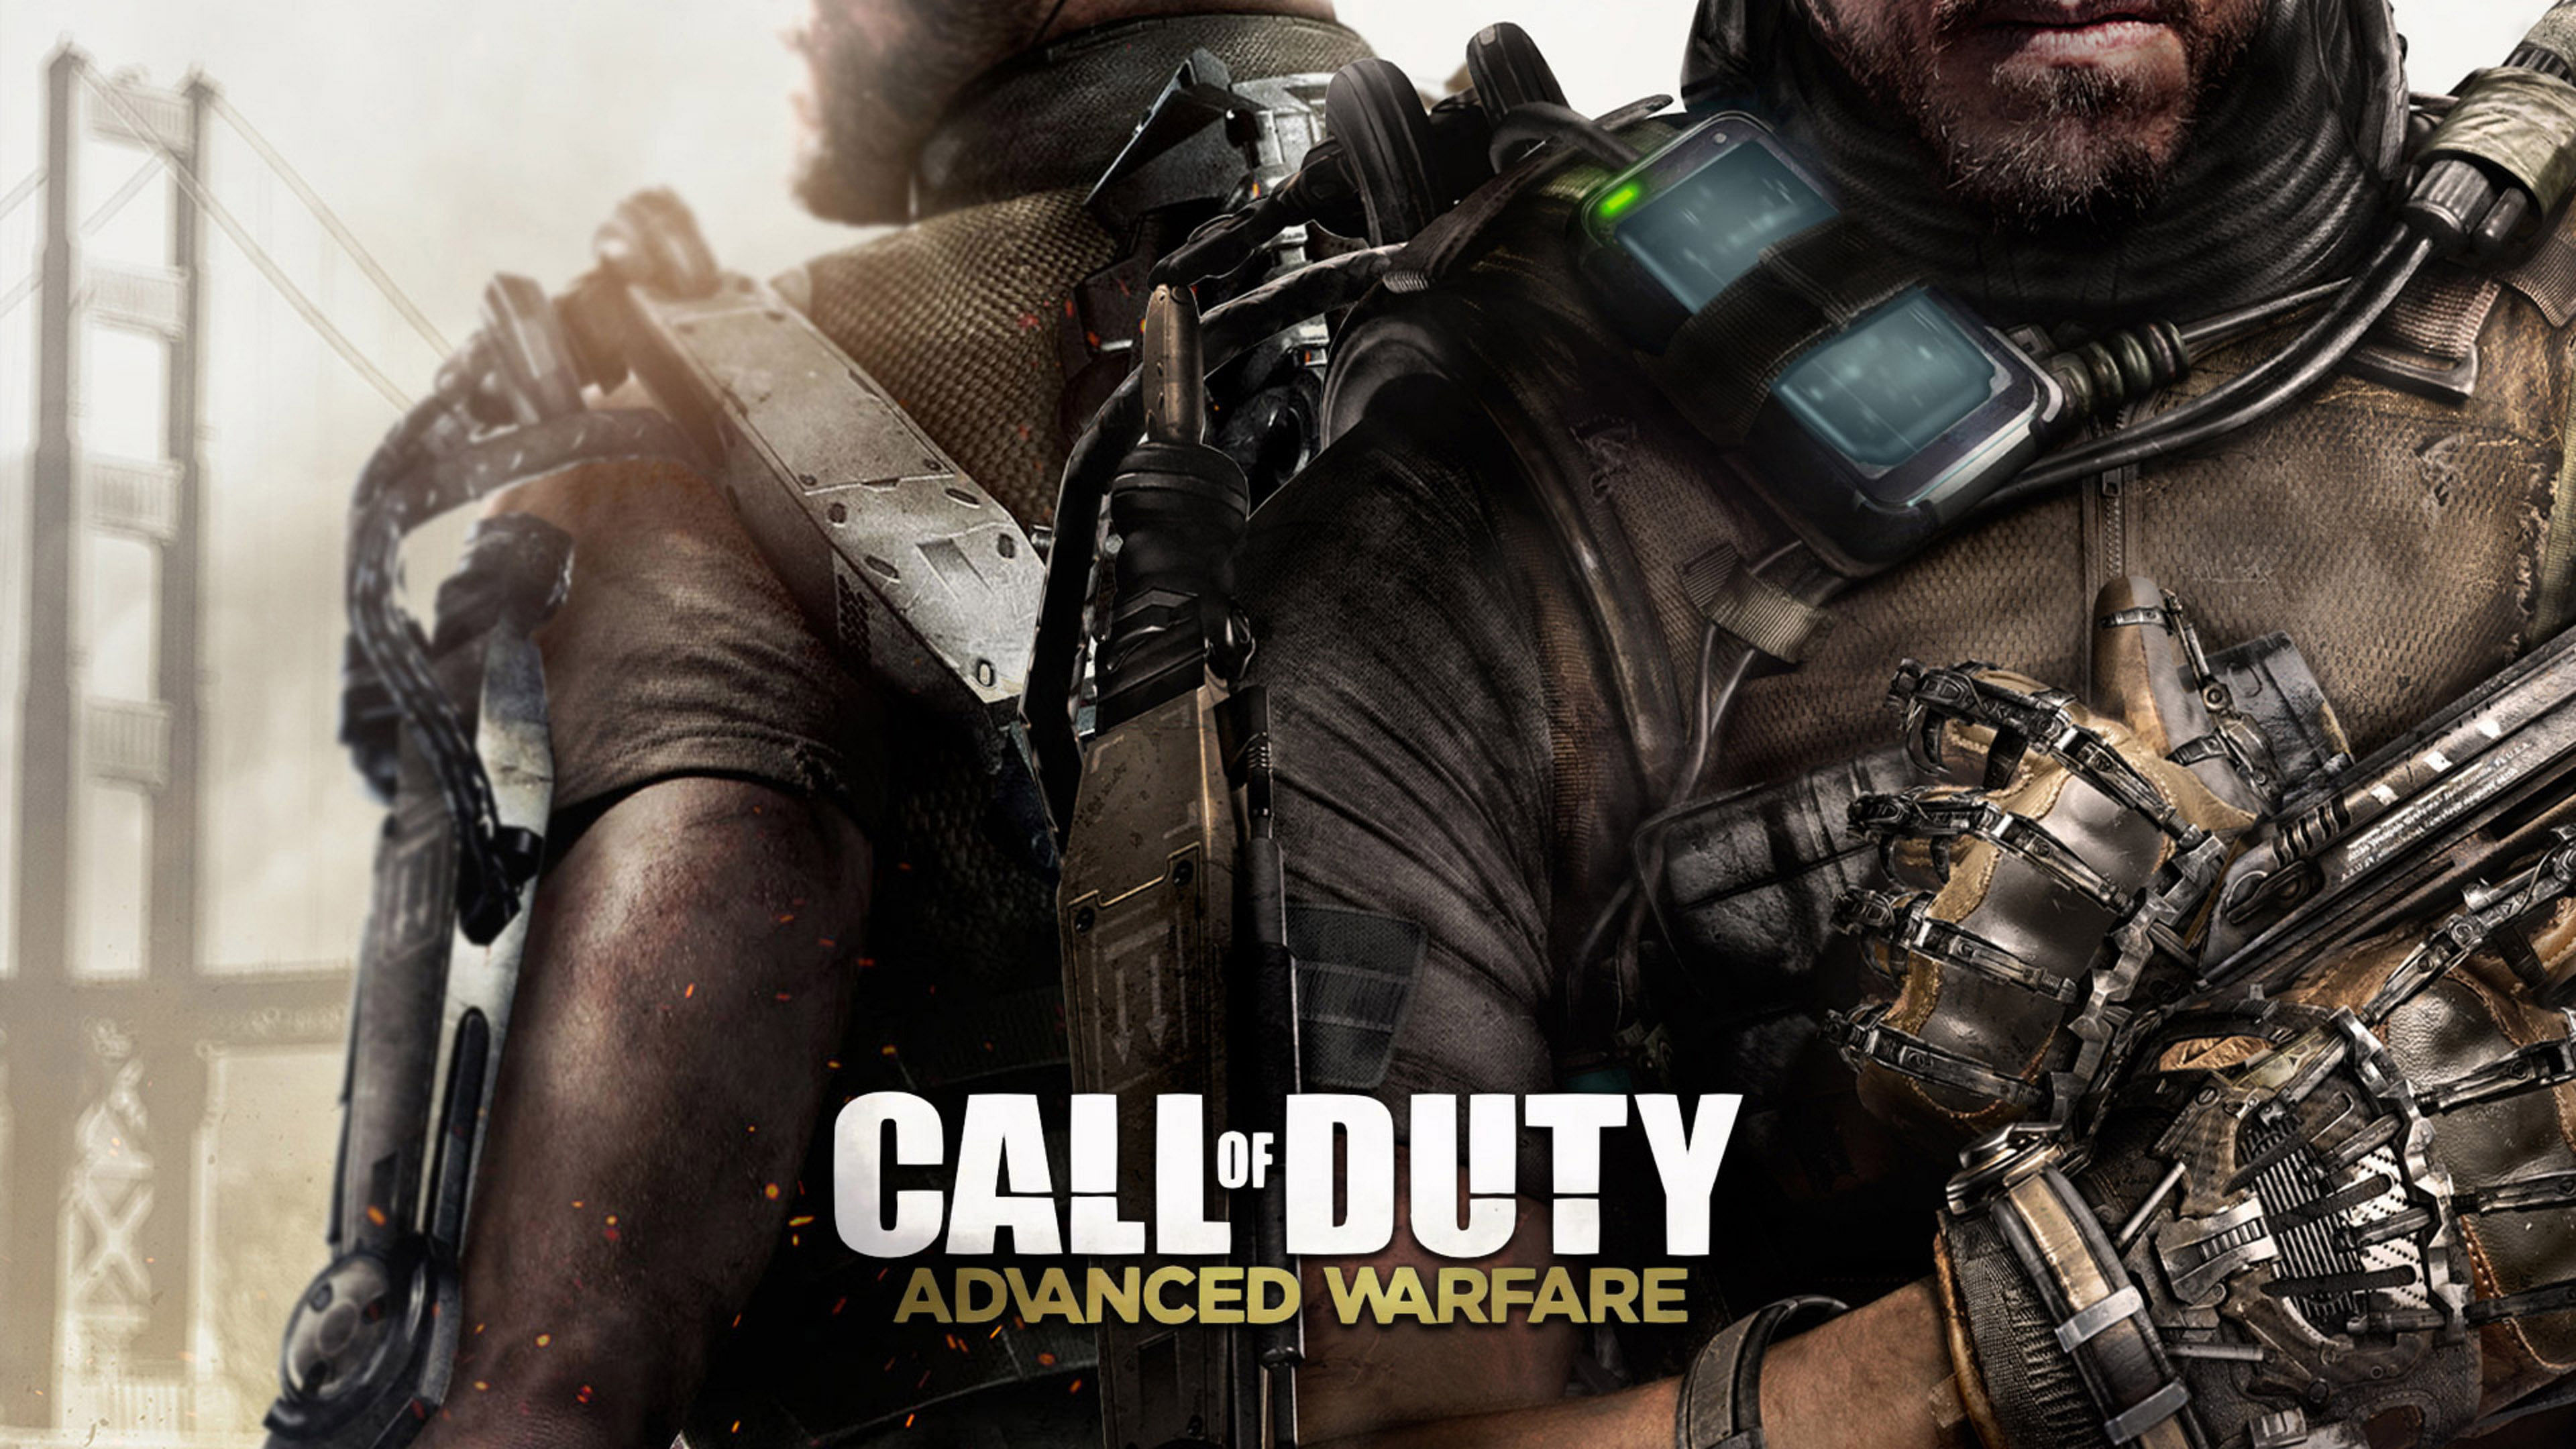 call-of-duty-advanced-warfare-havoc-dlc-to-release-on-february-27th-for-the-ps4-and-pc